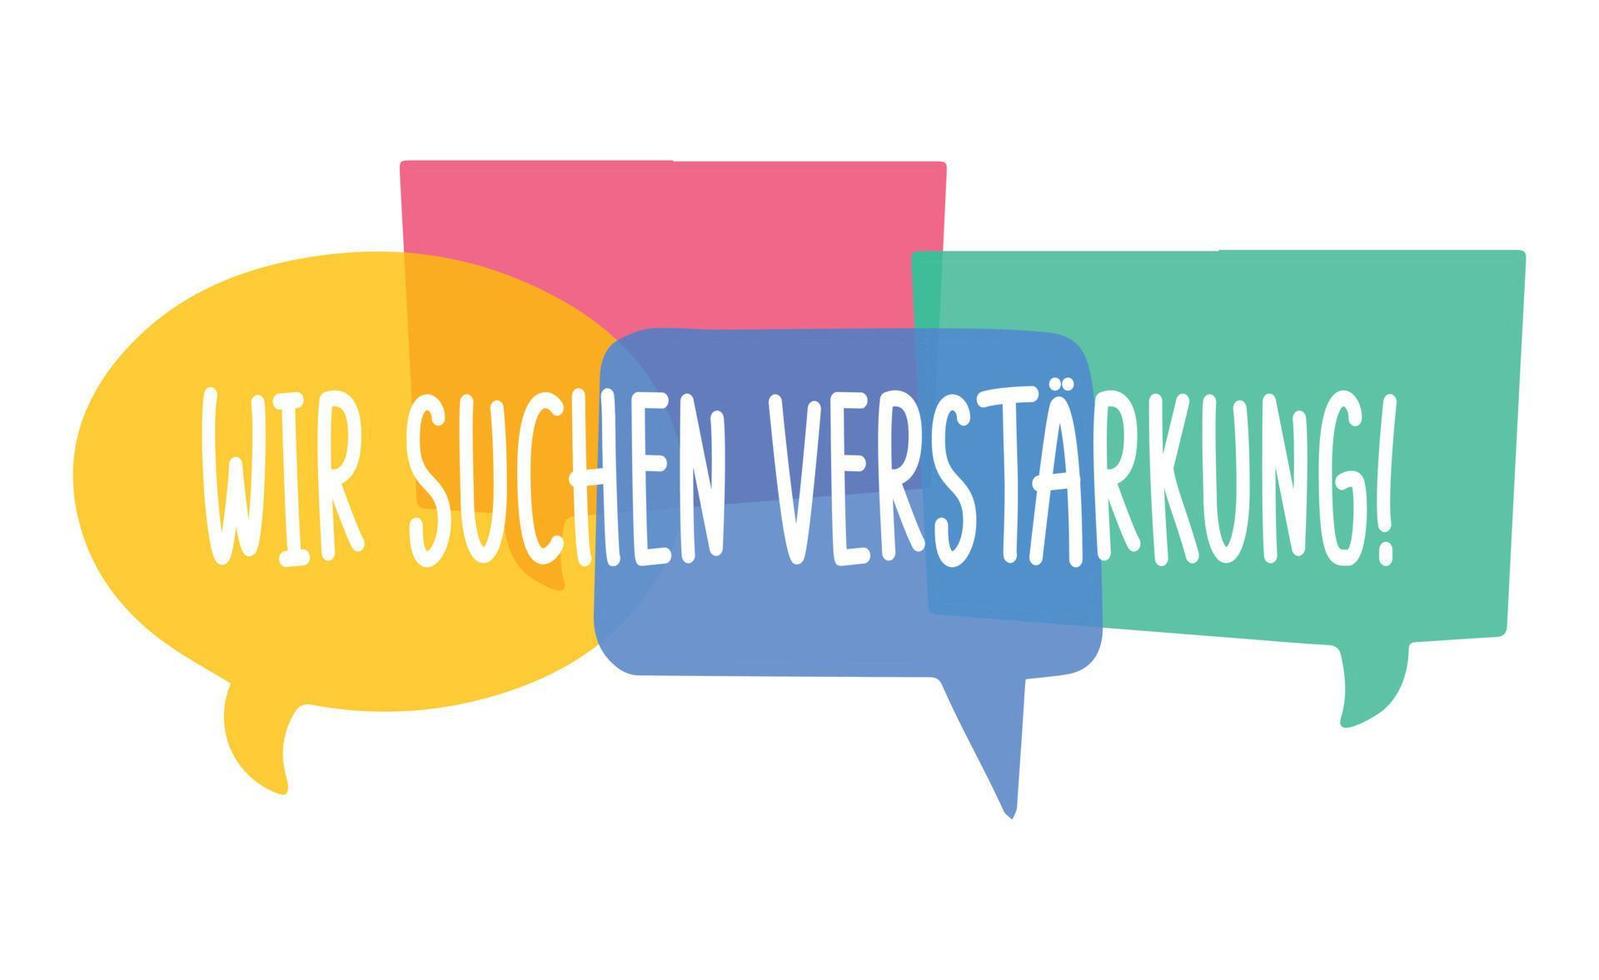 wir suchen verstarkung - German translation - we are looking for reinforcement. Hiring recruitment poster vector design with bright speech bubbles. Vacancy template. Job opening, search